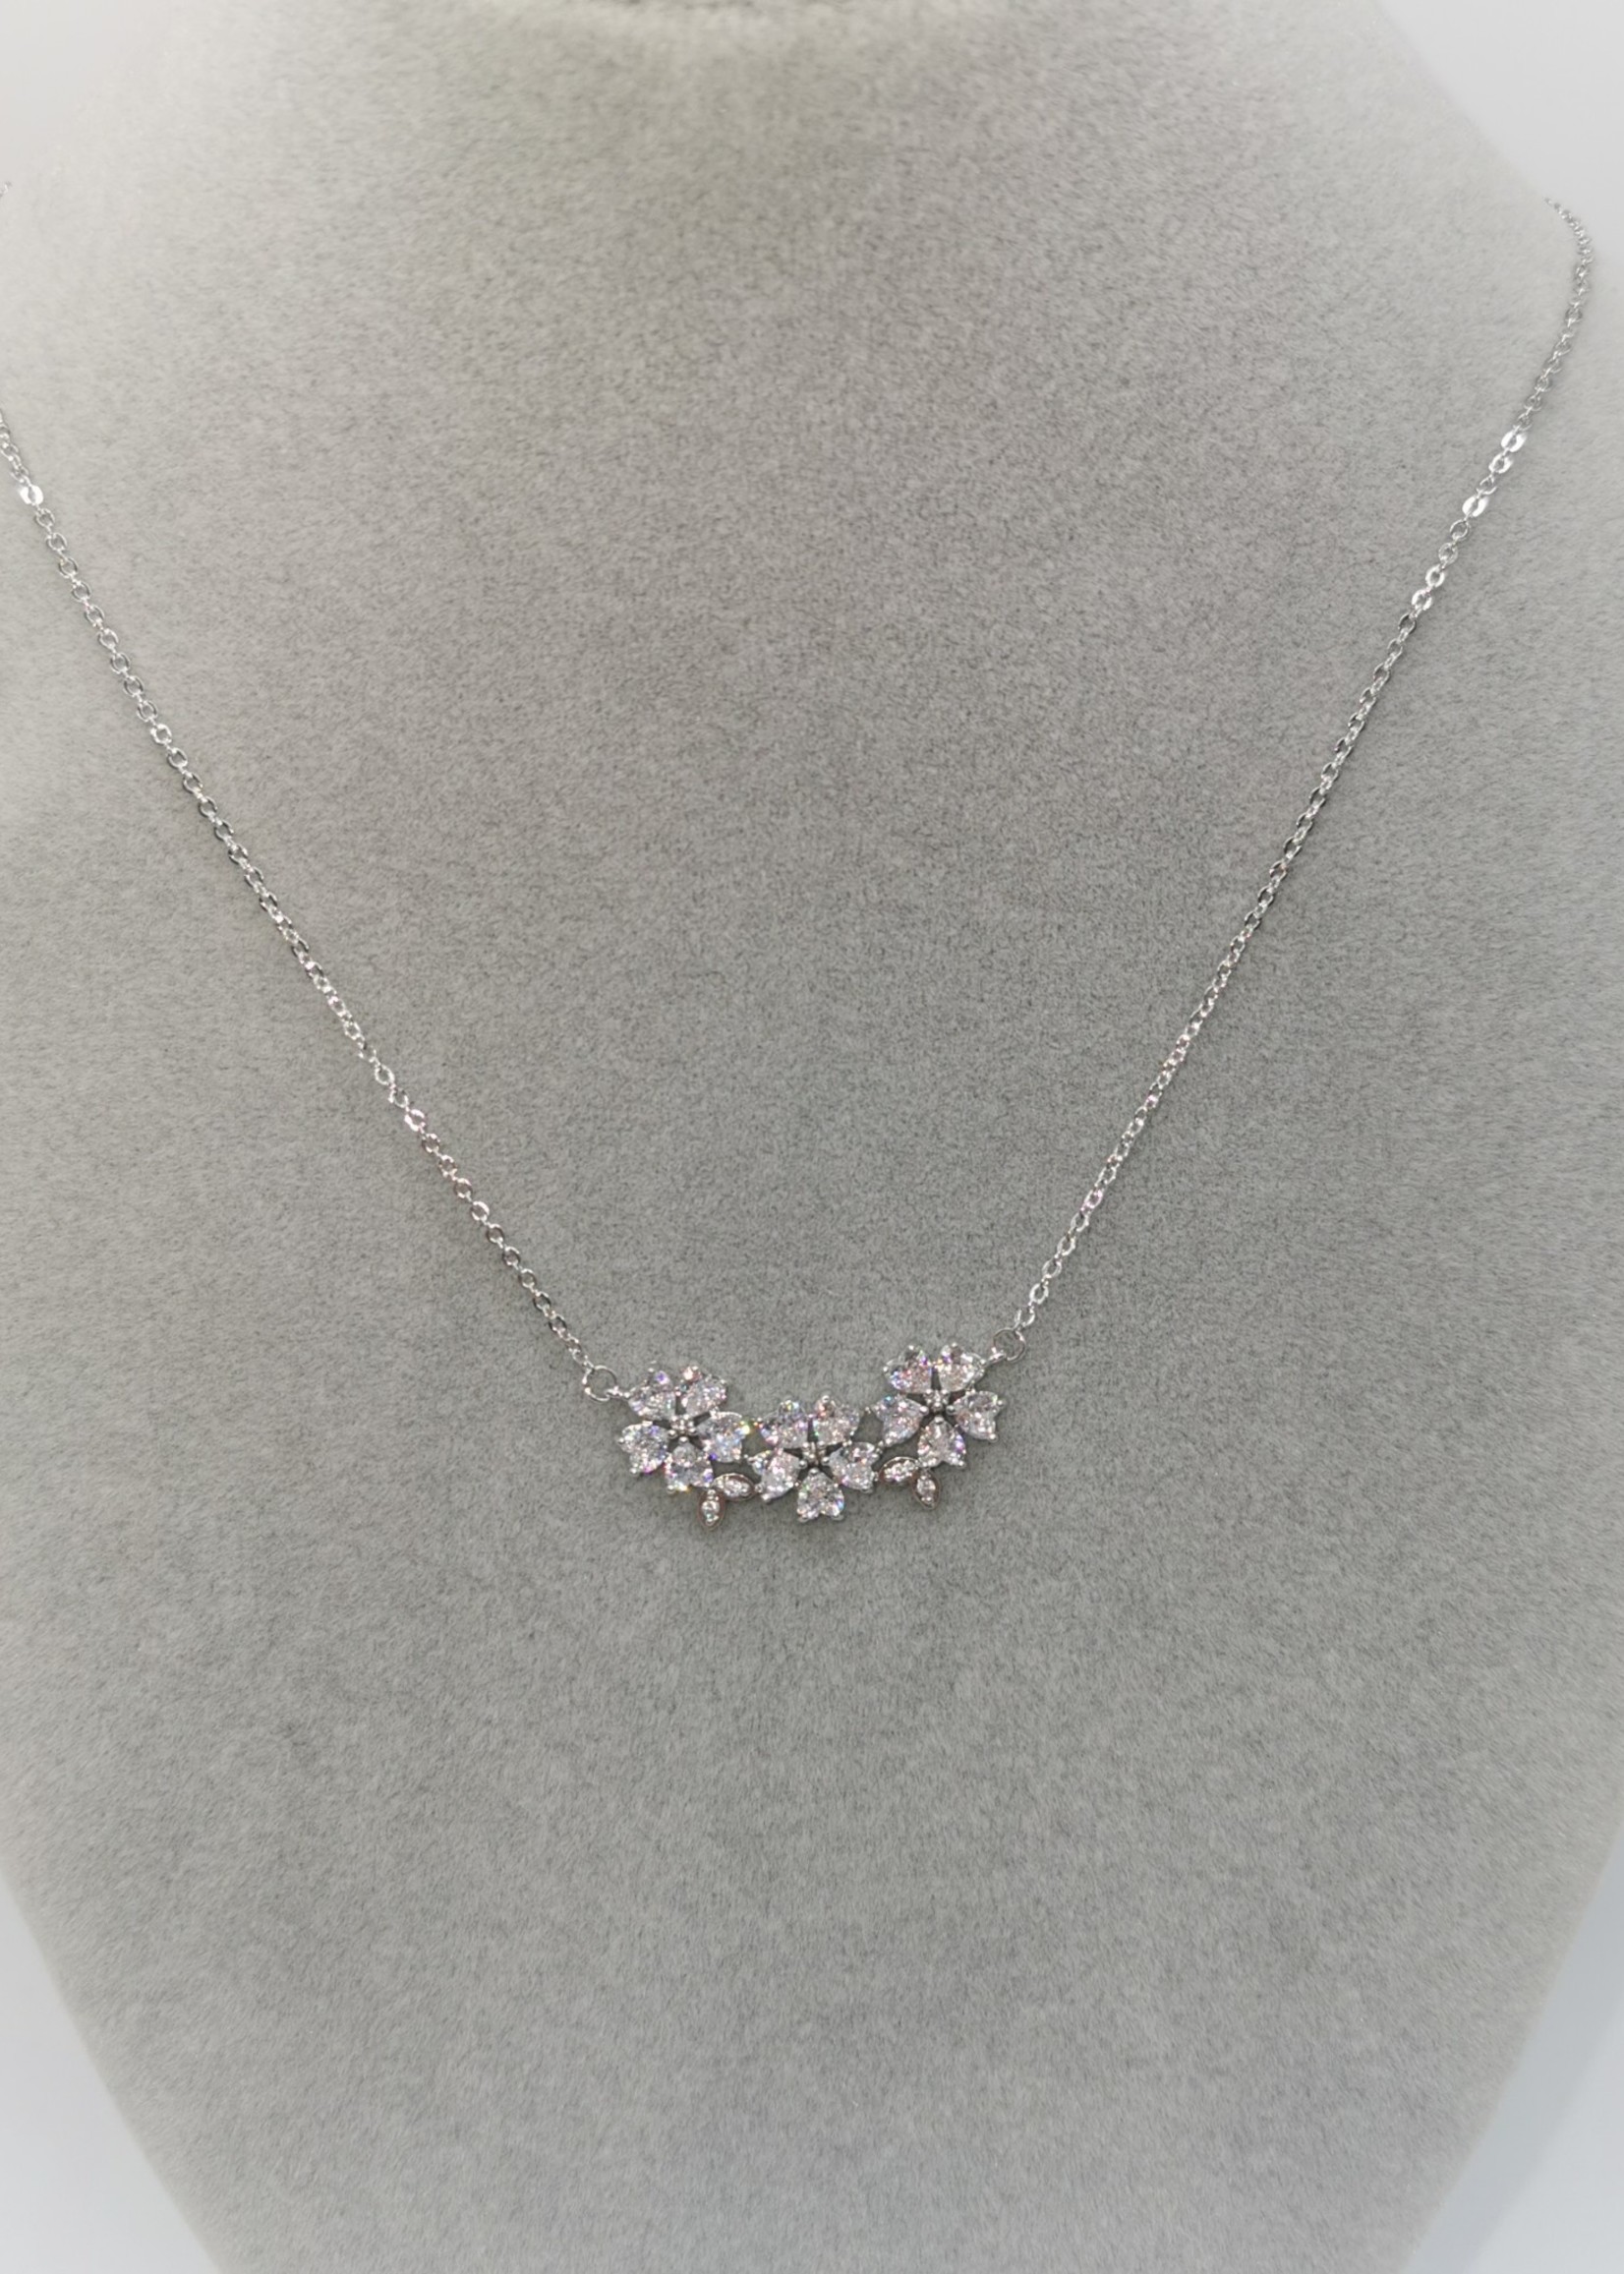 Necklace - 126 -B Silver Flower